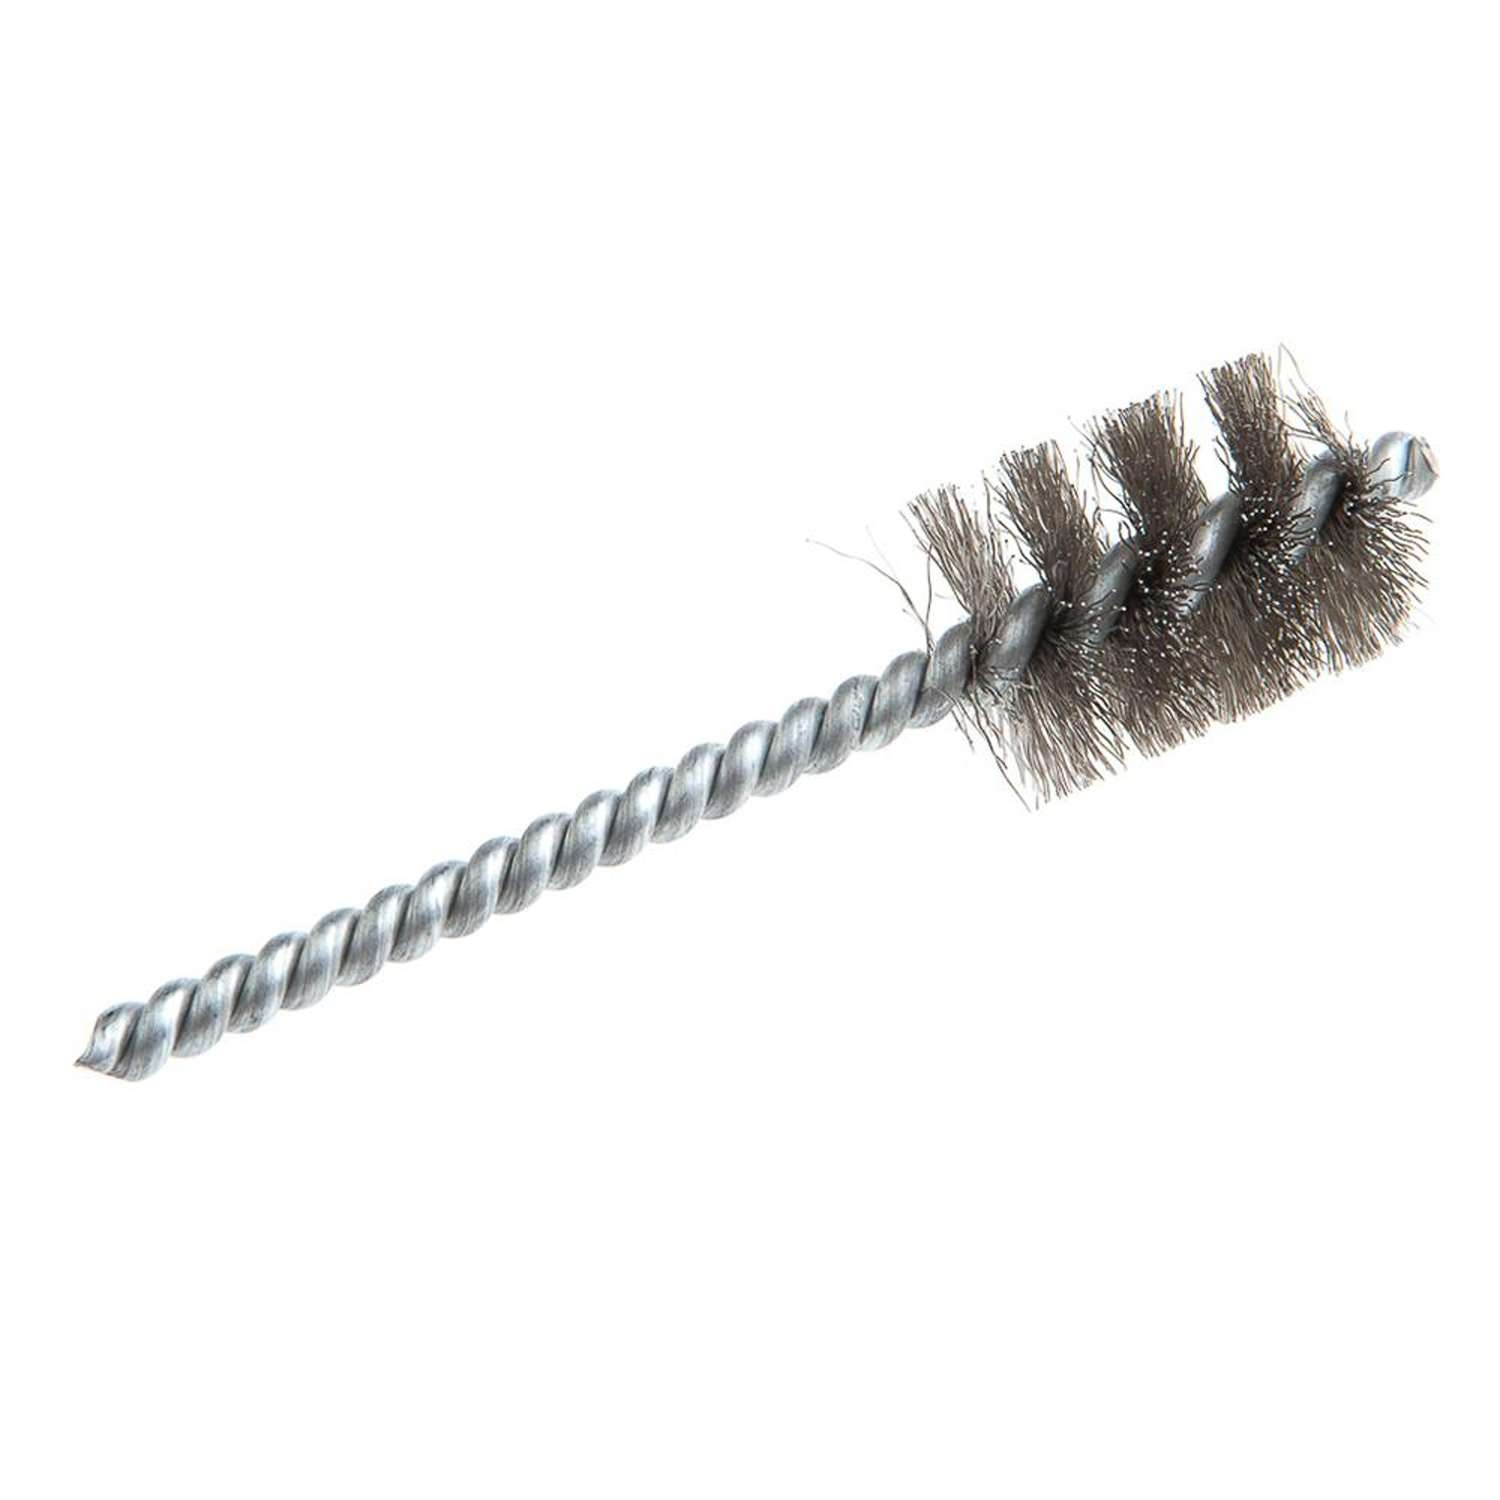 1pc Drum Washing Machine Cleaning Brush - Special Tool For Inner Tank,  Inner Wall Seam, Rubber Ring Cleaning Soft S Brush